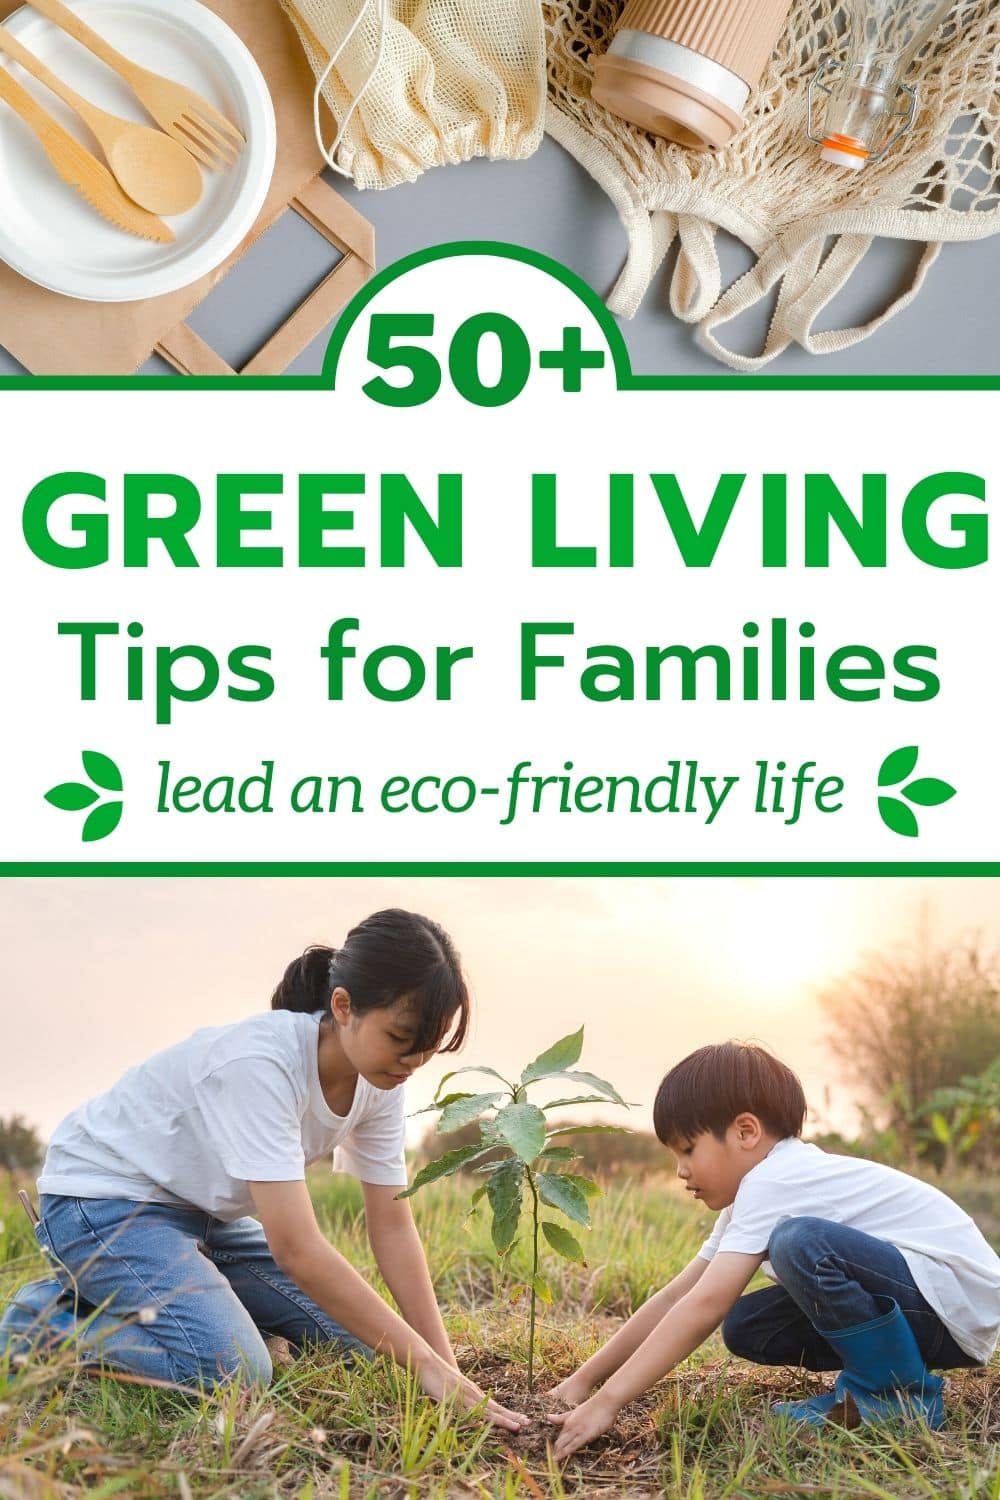 green living ideas for families title mom and child planting a plant